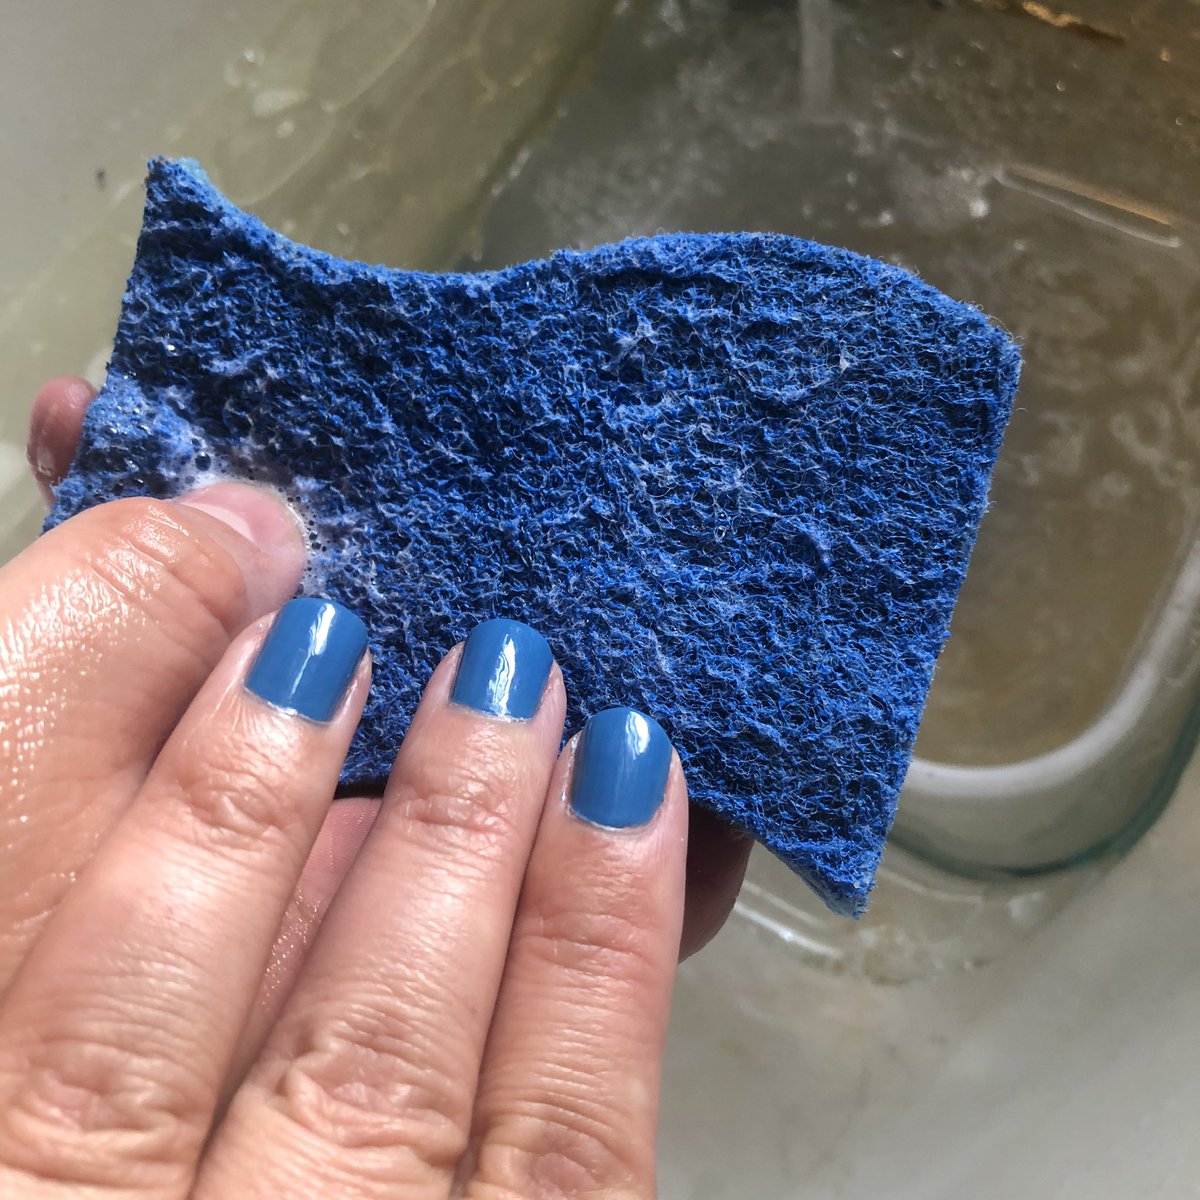 And even the dish sponge. NOT THAT I’D DO DISHES WITH FRESH NAILS! Oh the humanity!